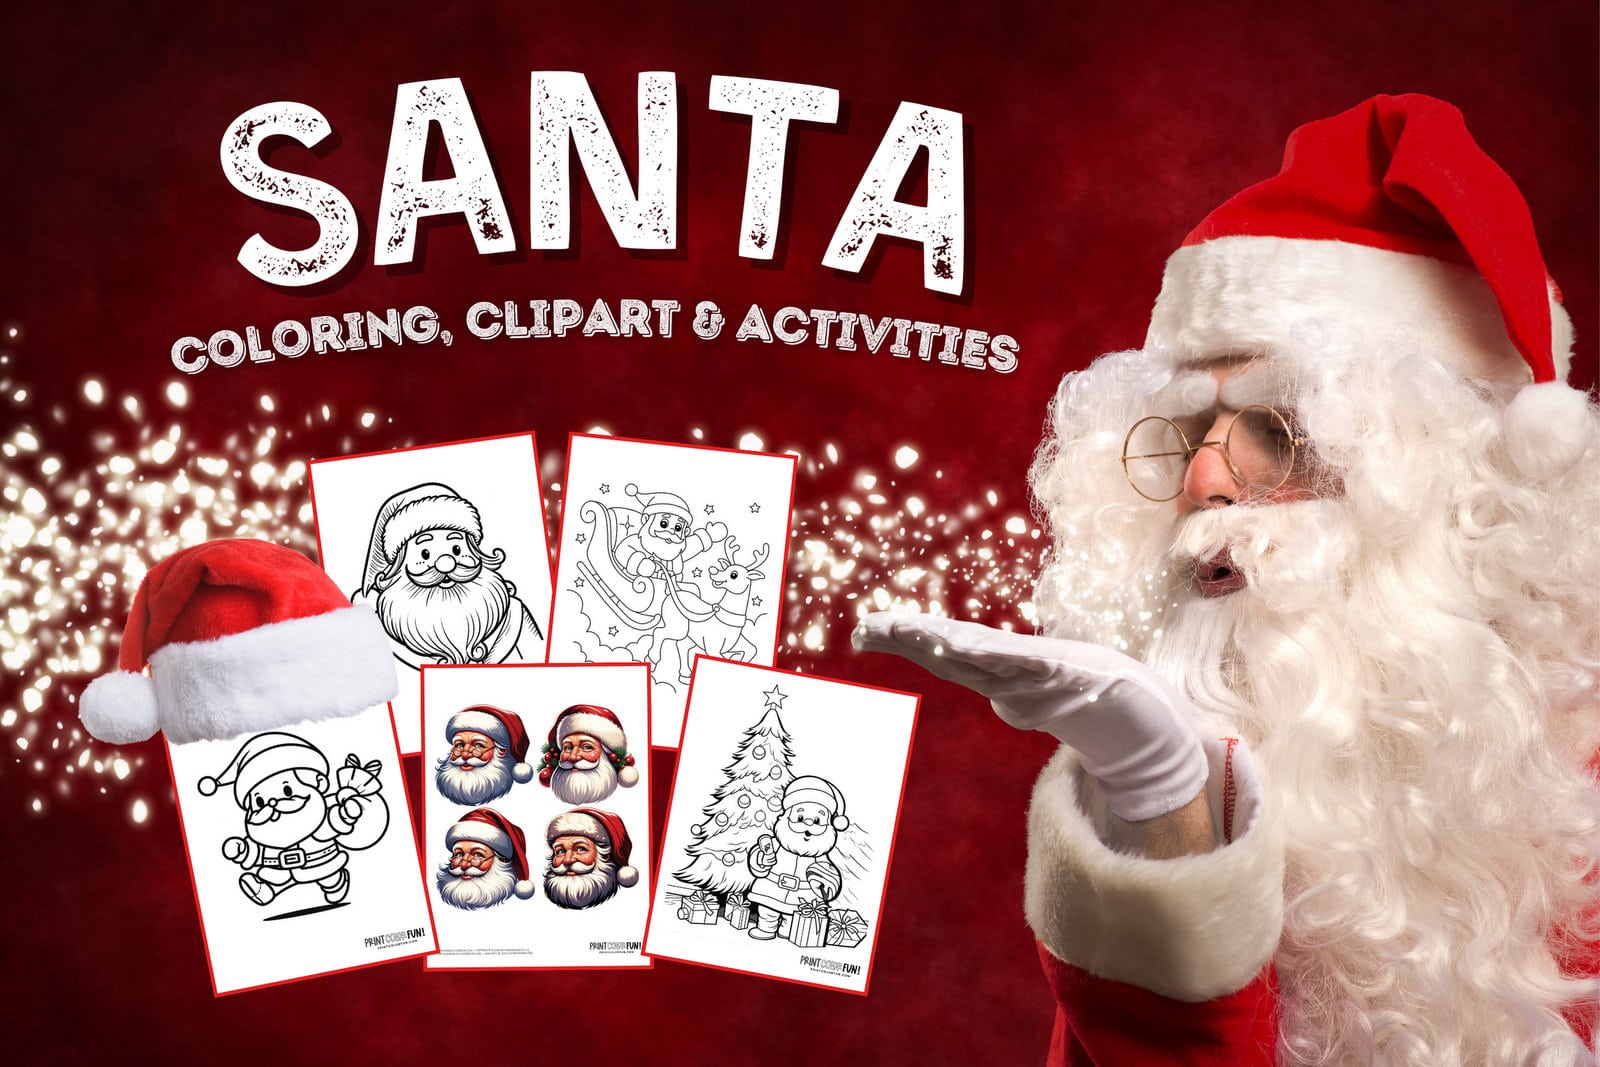 Santa Claus coloring page clipart activities from PrintColorFun com